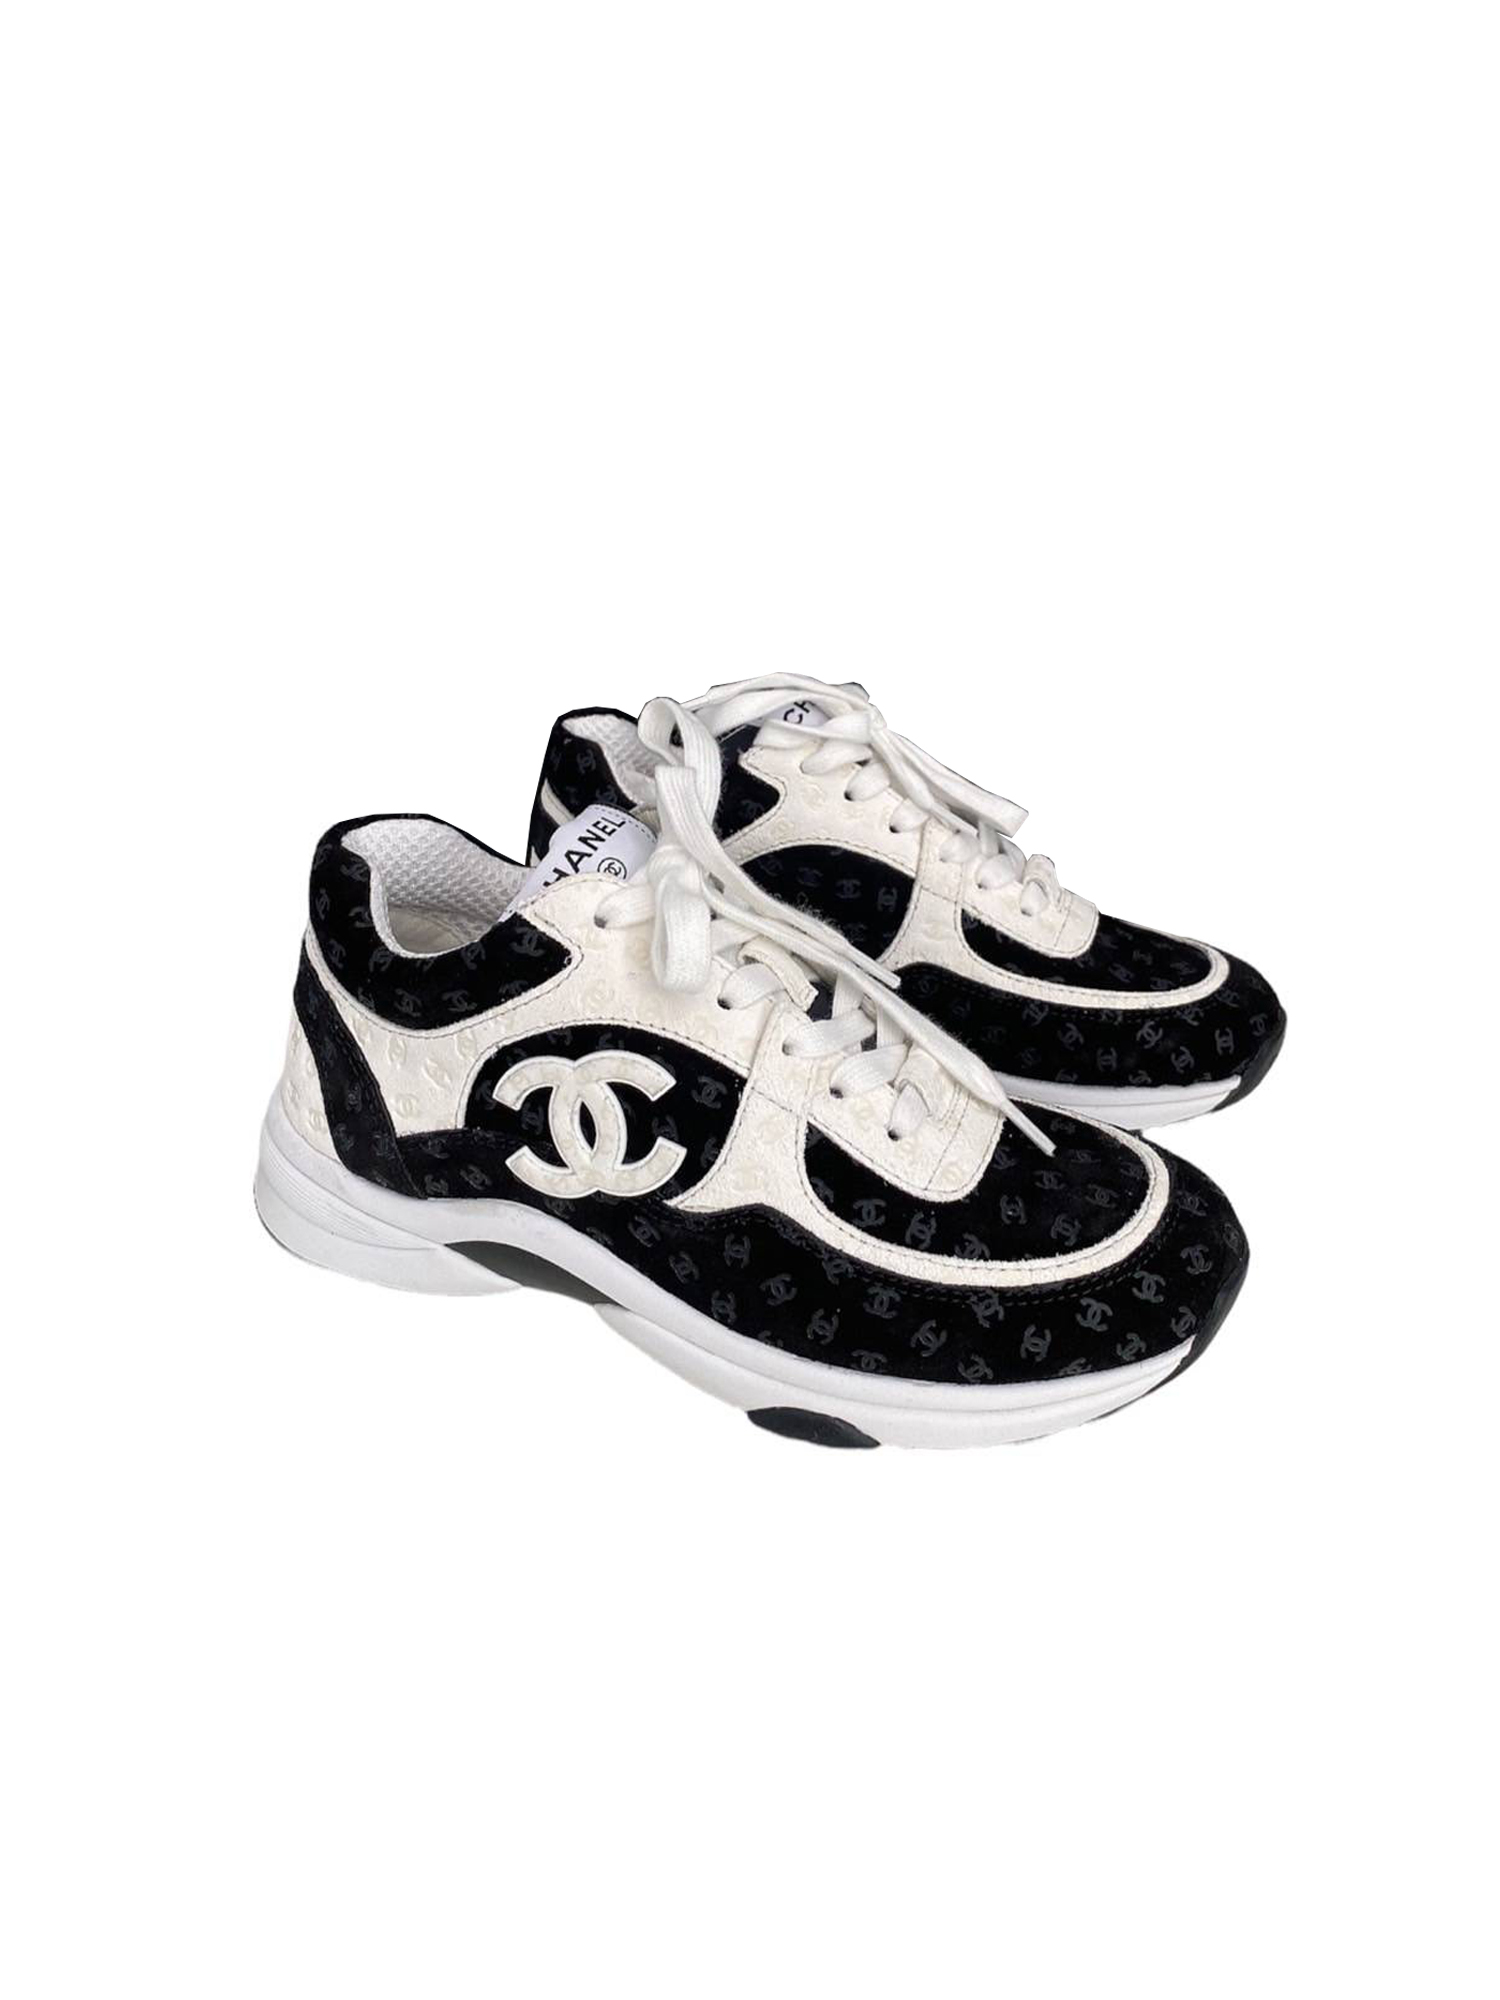 Chanel Printed Suede Calfskin CC Logo Sneakers/Trainers Size 36